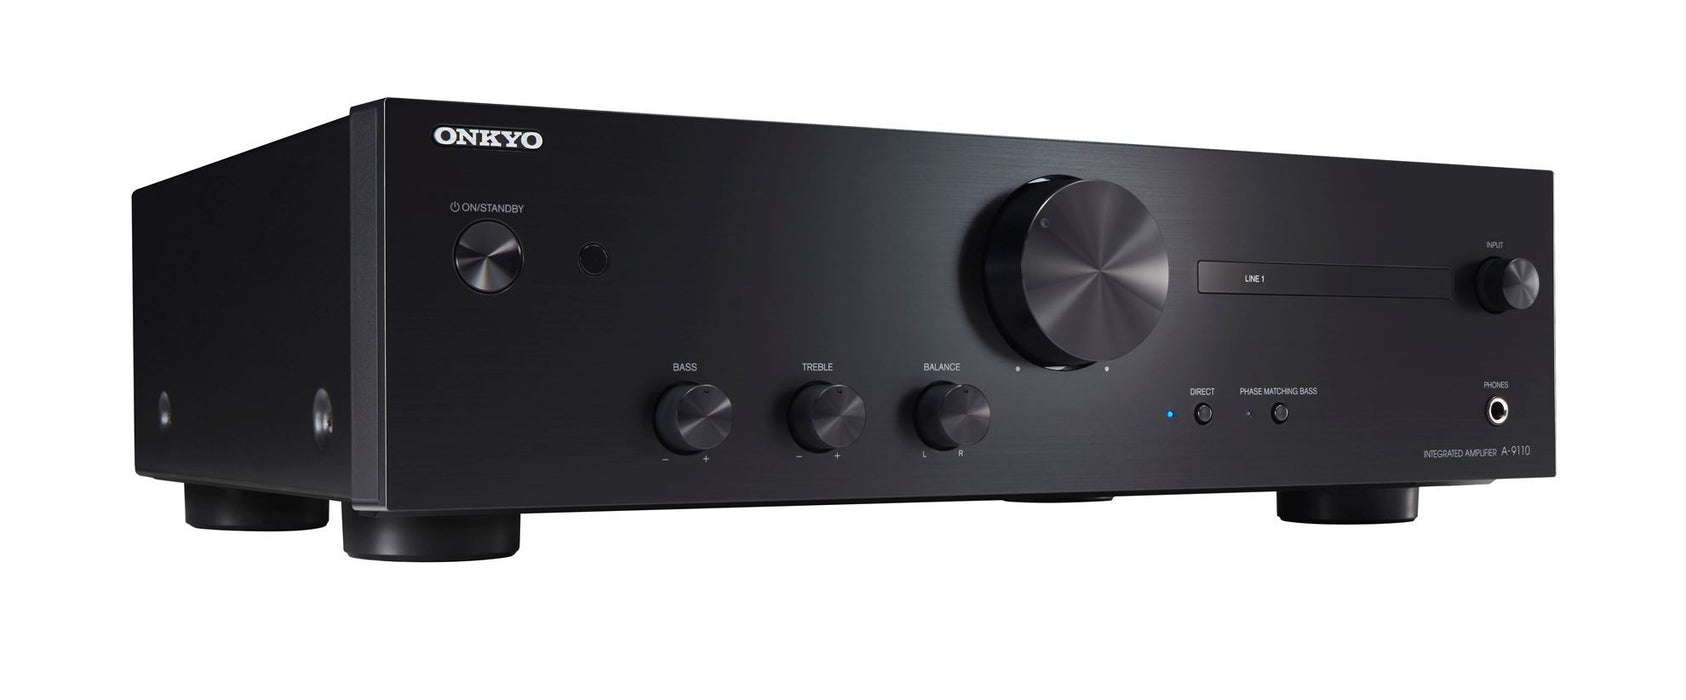 ONKYO Integrated Stereo Amplifier. 50W + 50W High current amplification. Four oh